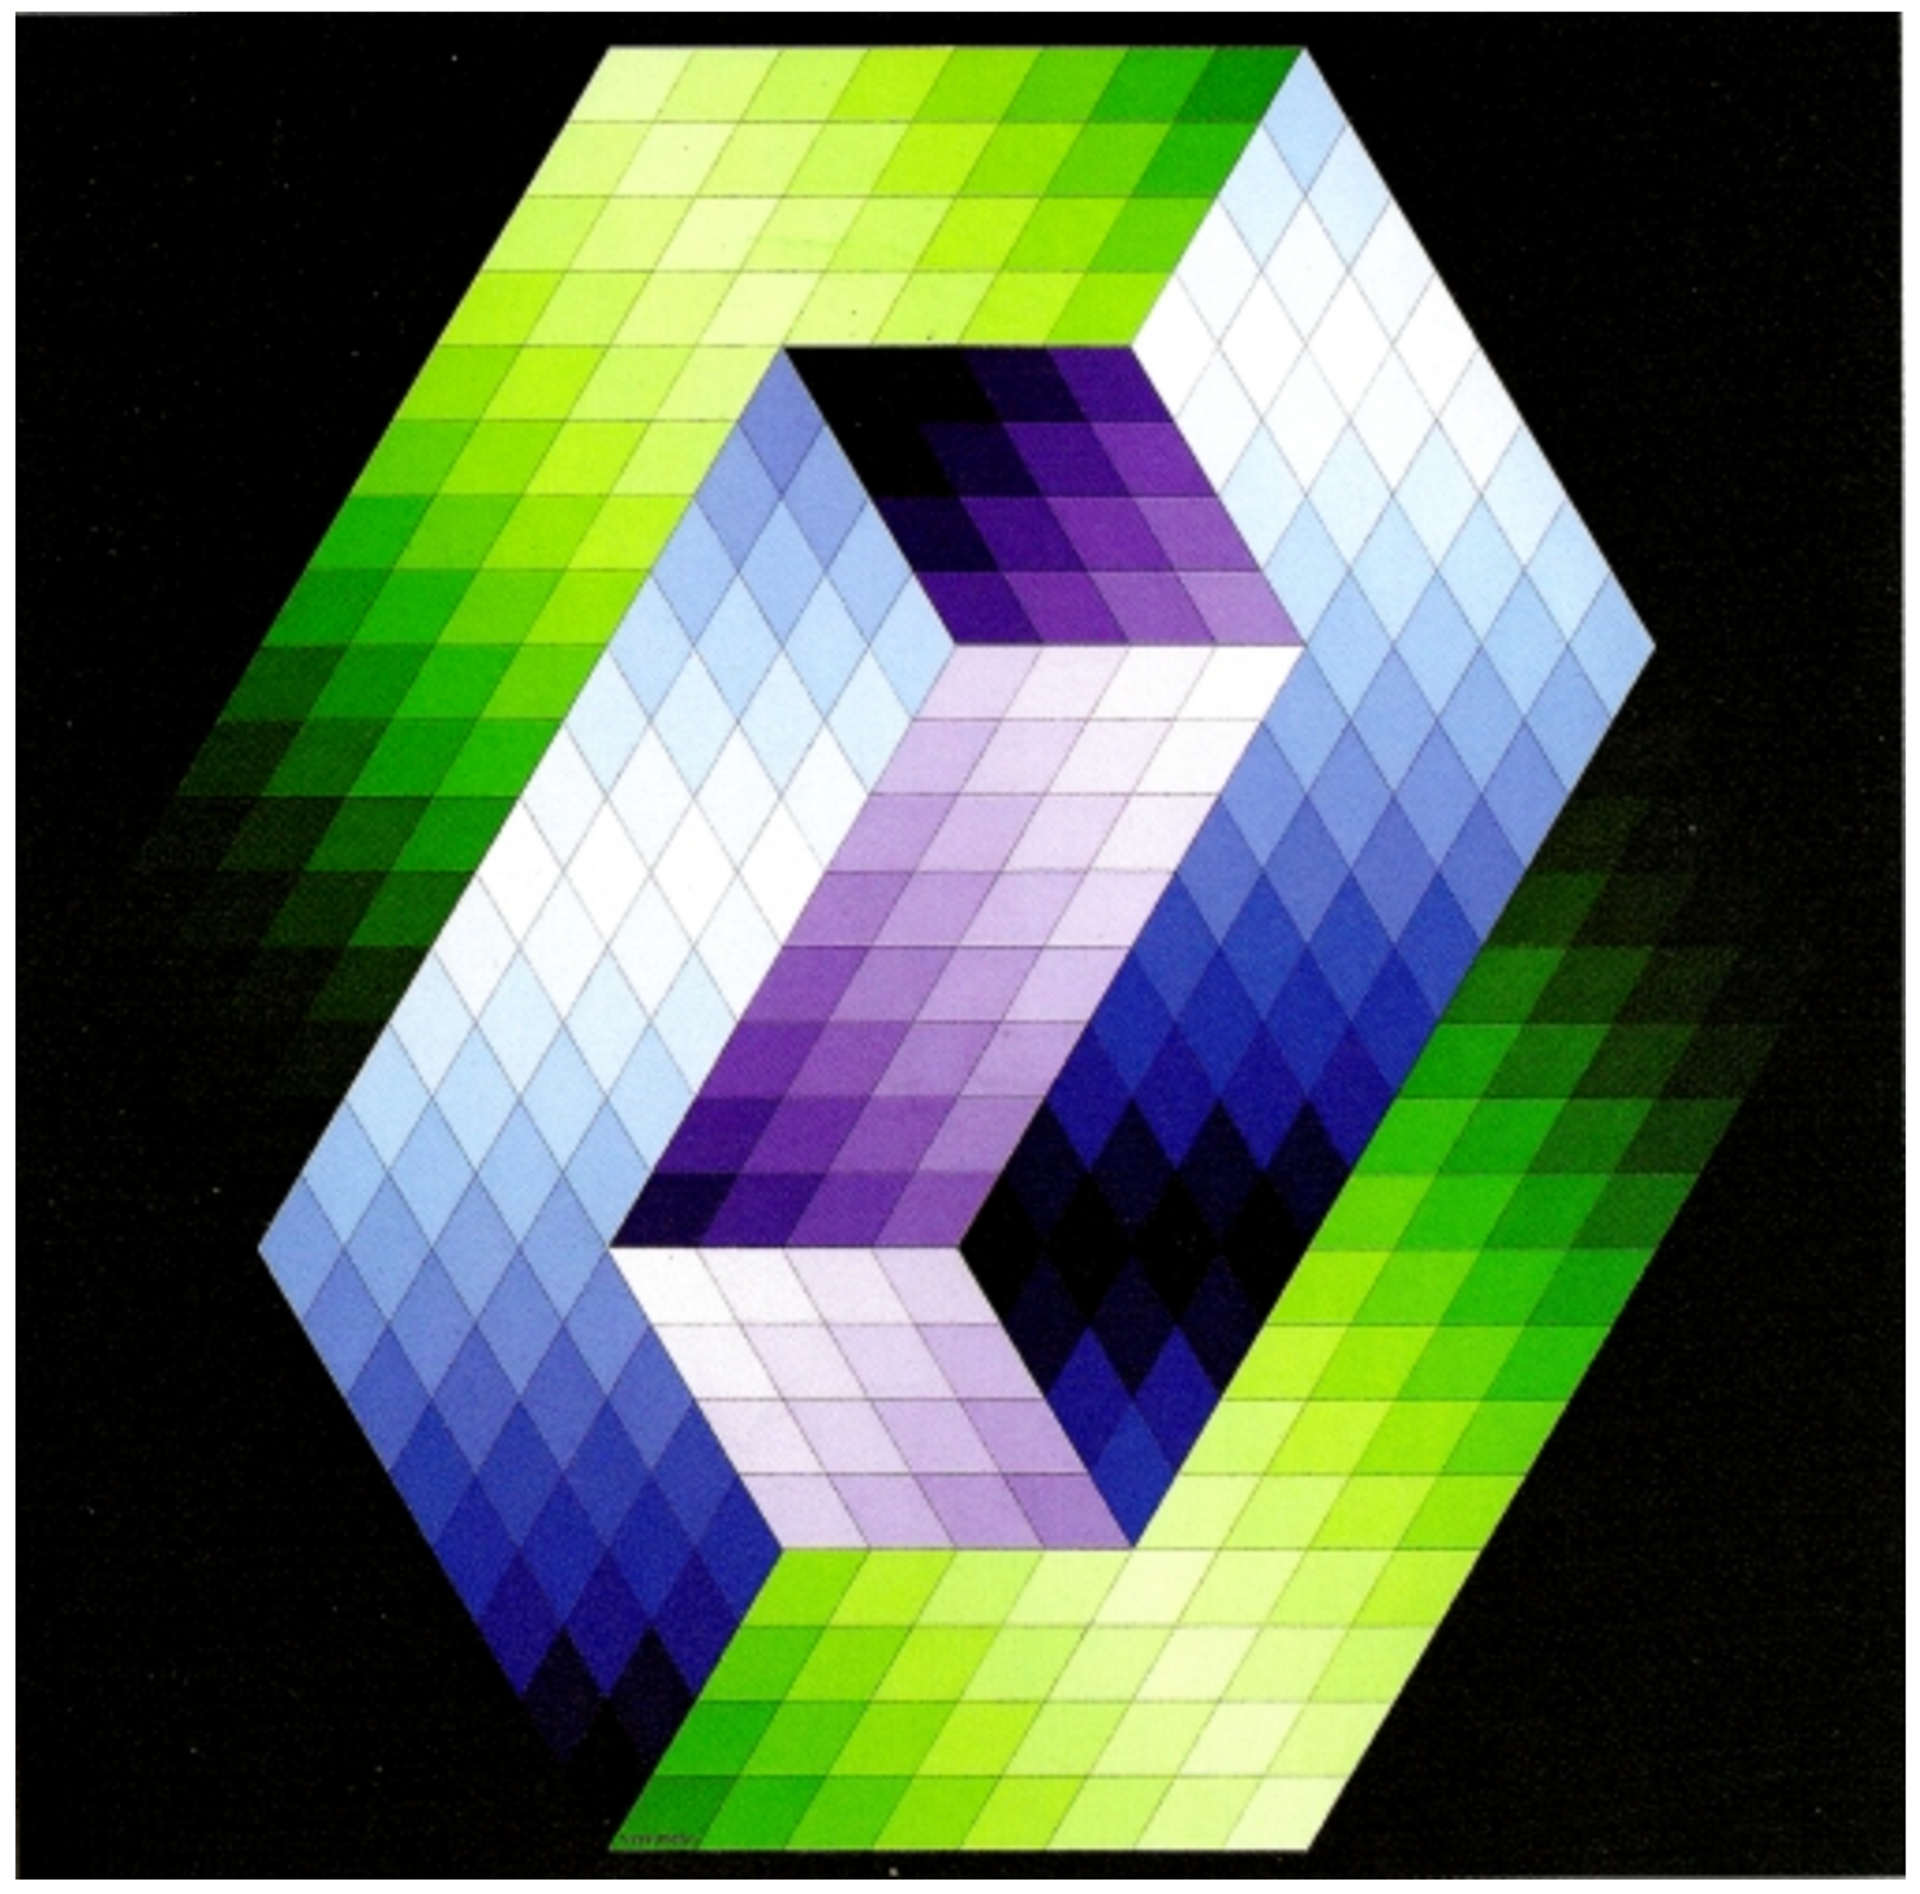 A geometric abstract work featuring interlocking diamond shapes in shades of blue, white, green, and purple that create three-dimensional cubes aganist a black background.